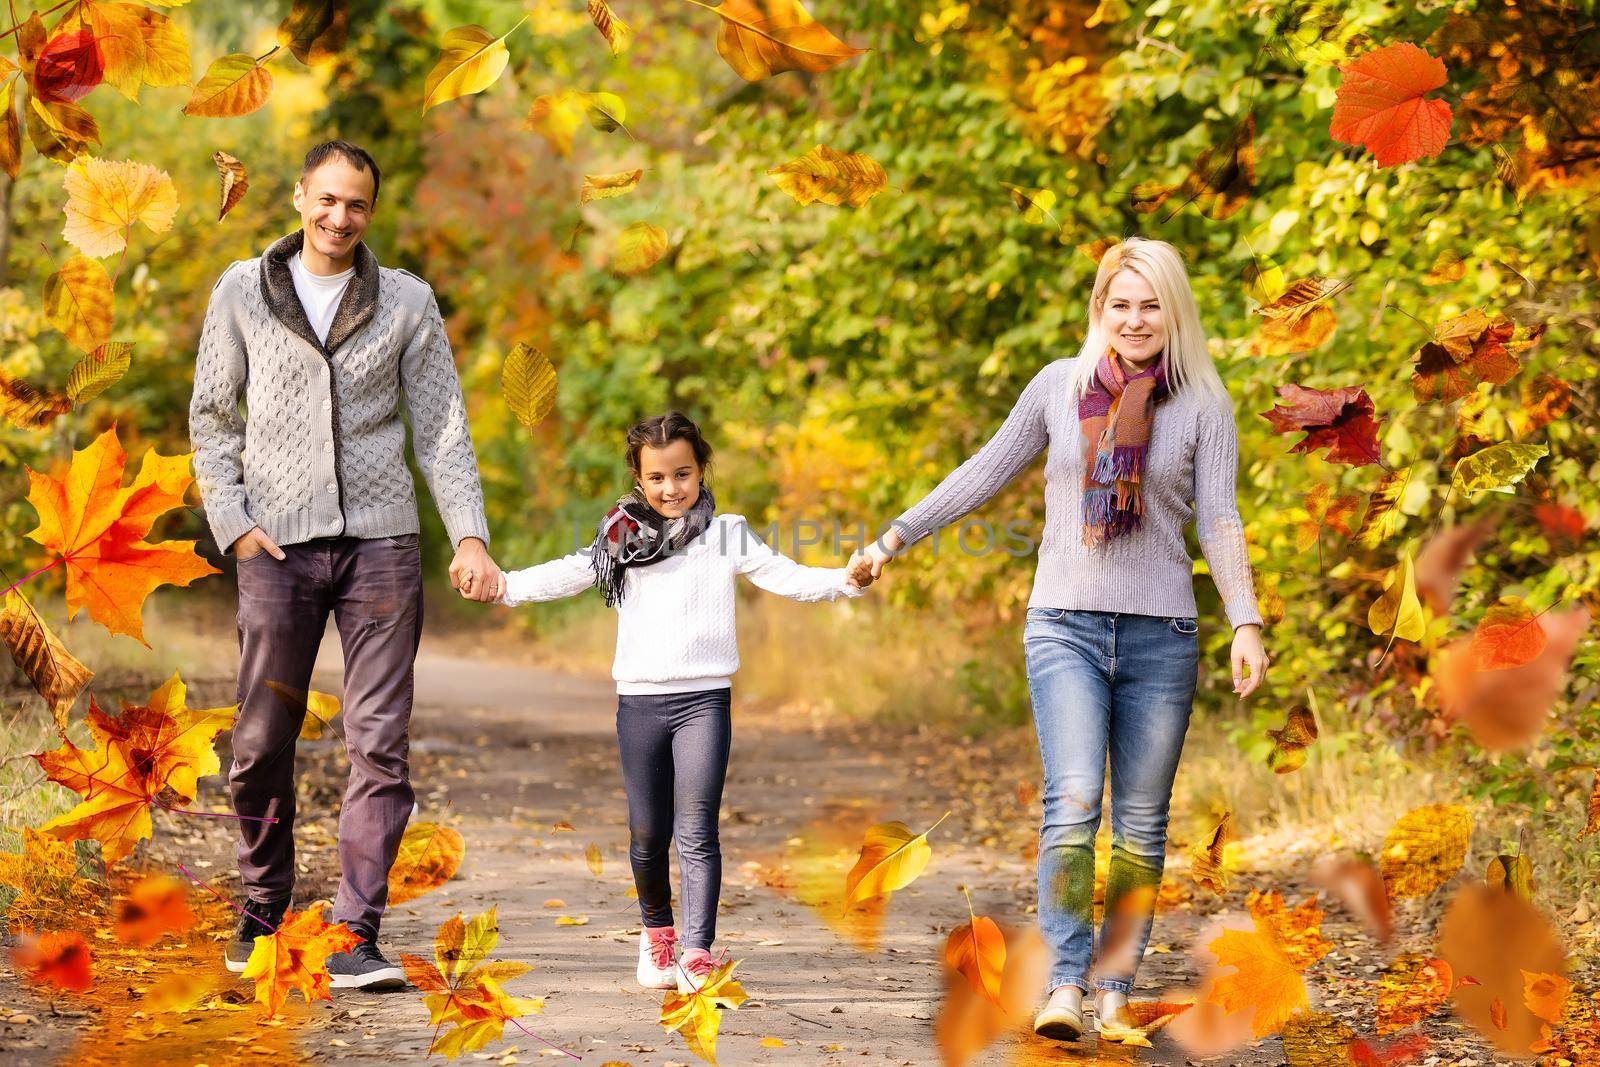 family walking in an autumn park with fallen fall leaves by Andelov13